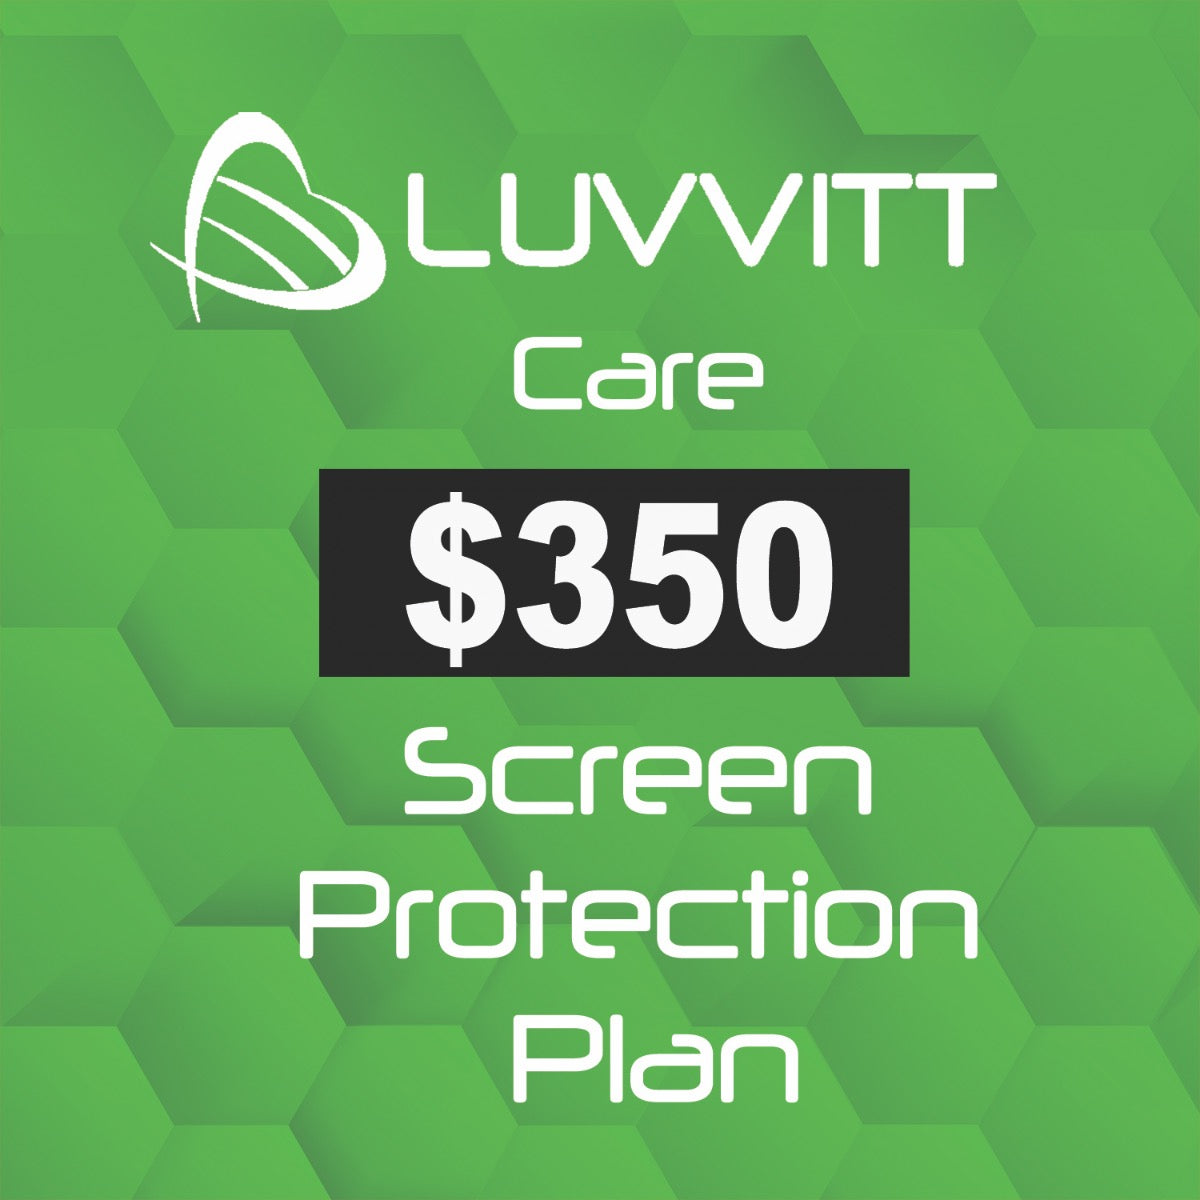 Luvvitt Care $350 Screen Protection Coverage for all Mobile Devices